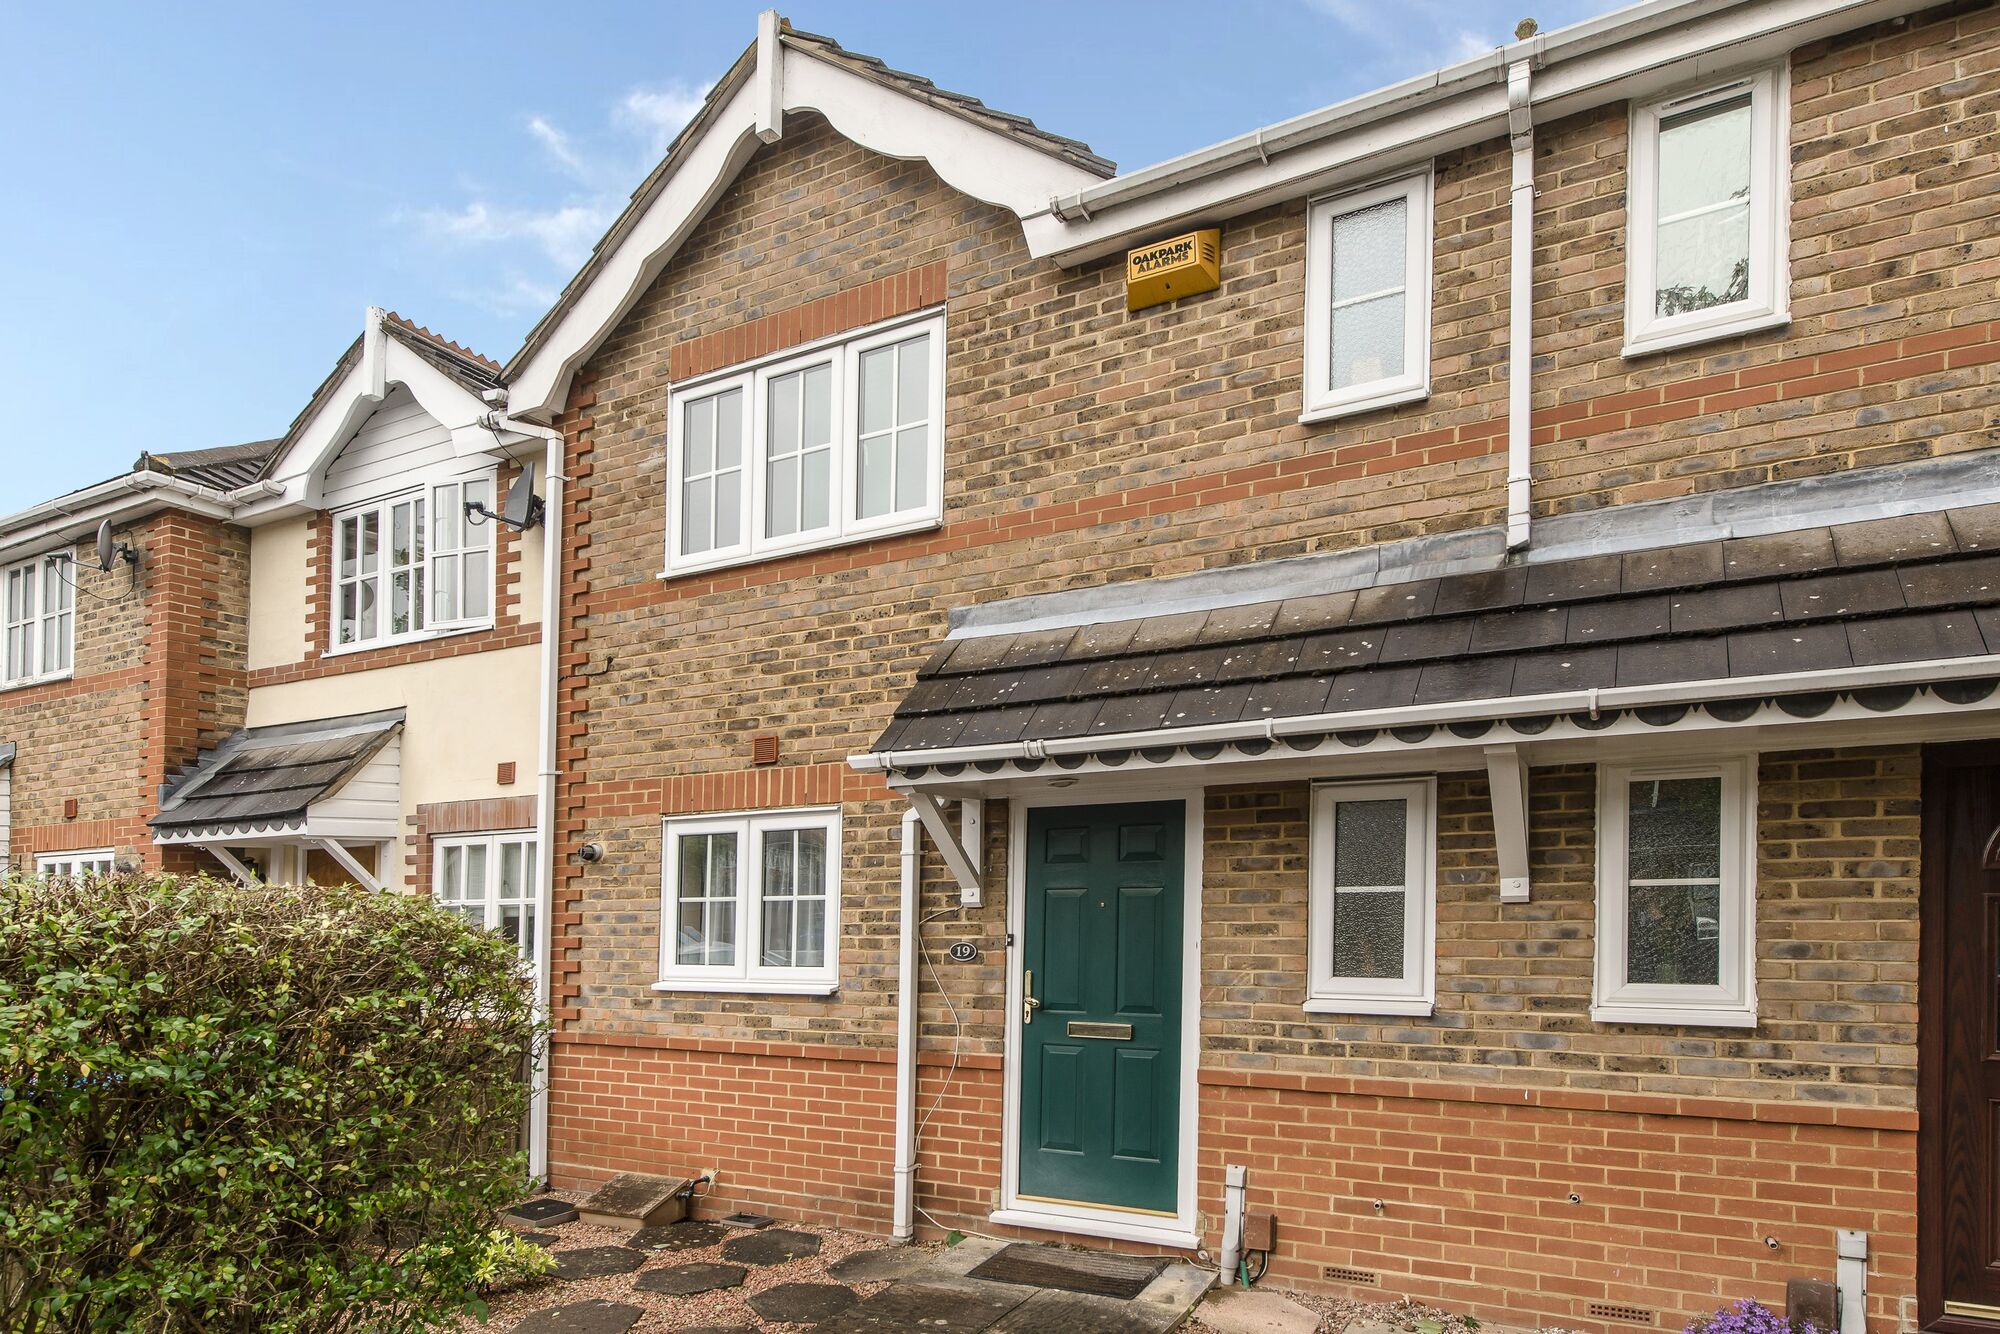 2 bedroom semi detached house for sale Archdale Place, New Malden, KT3, main image